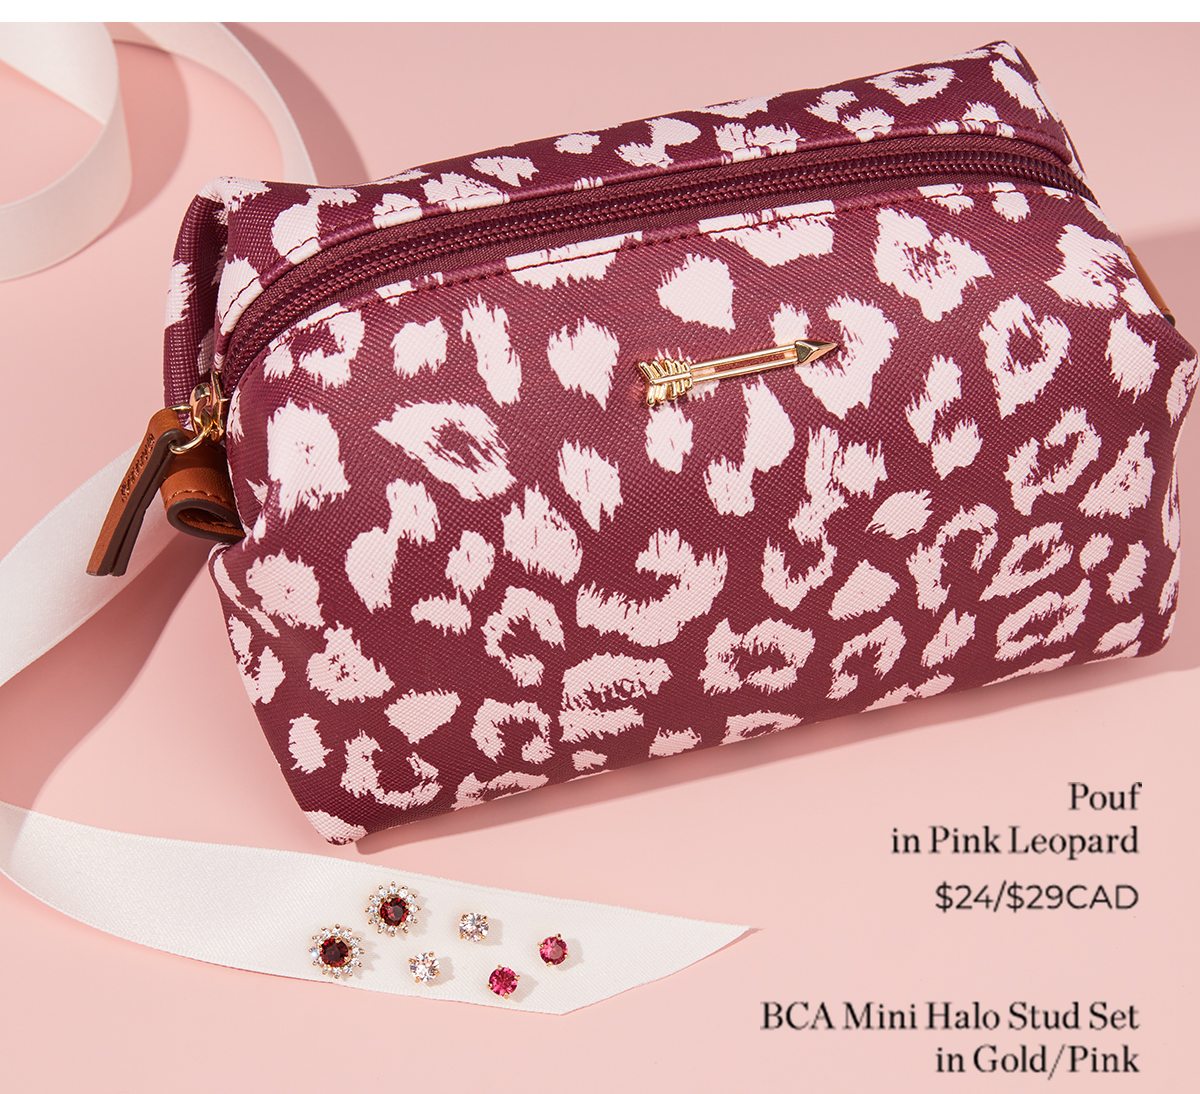 Pouf in Pink Leopard $24/$29CAD | BCA Mini Halo Stud Set in Gold/Pink $39/$49CAD